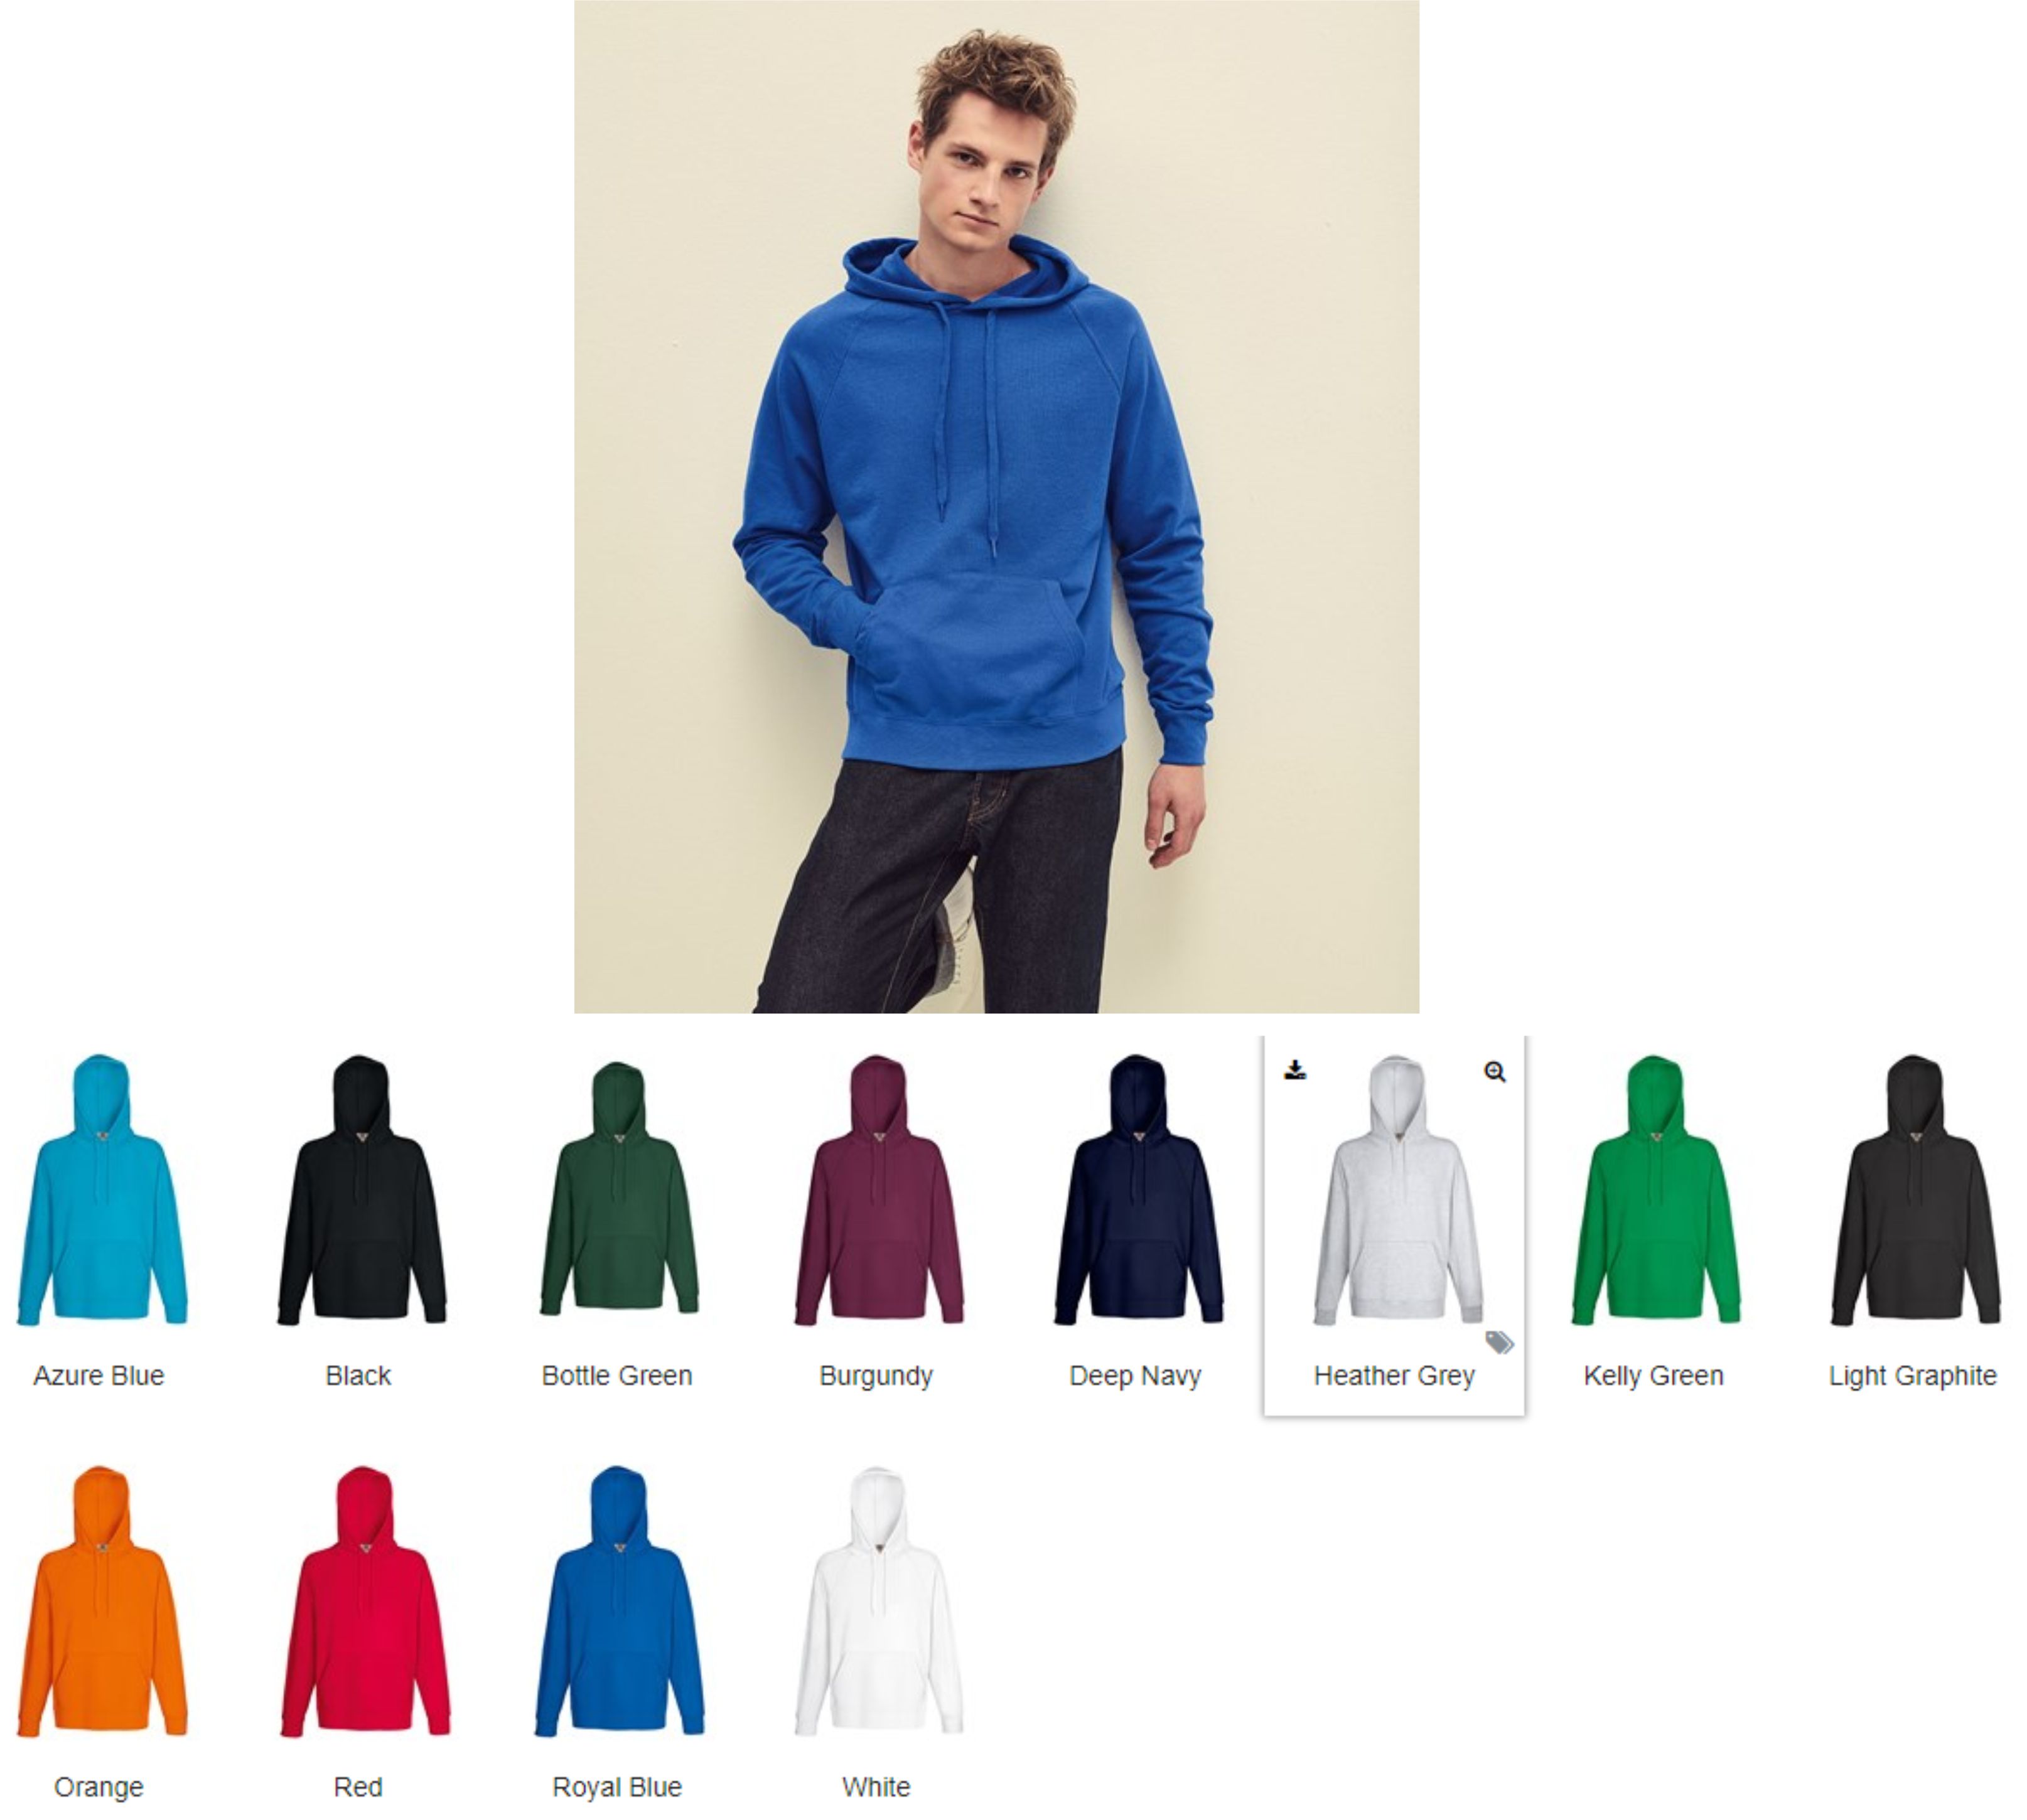 Fruit of the Loom SS56 Lightweight Hooded Sweatshirt - Click Image to Close